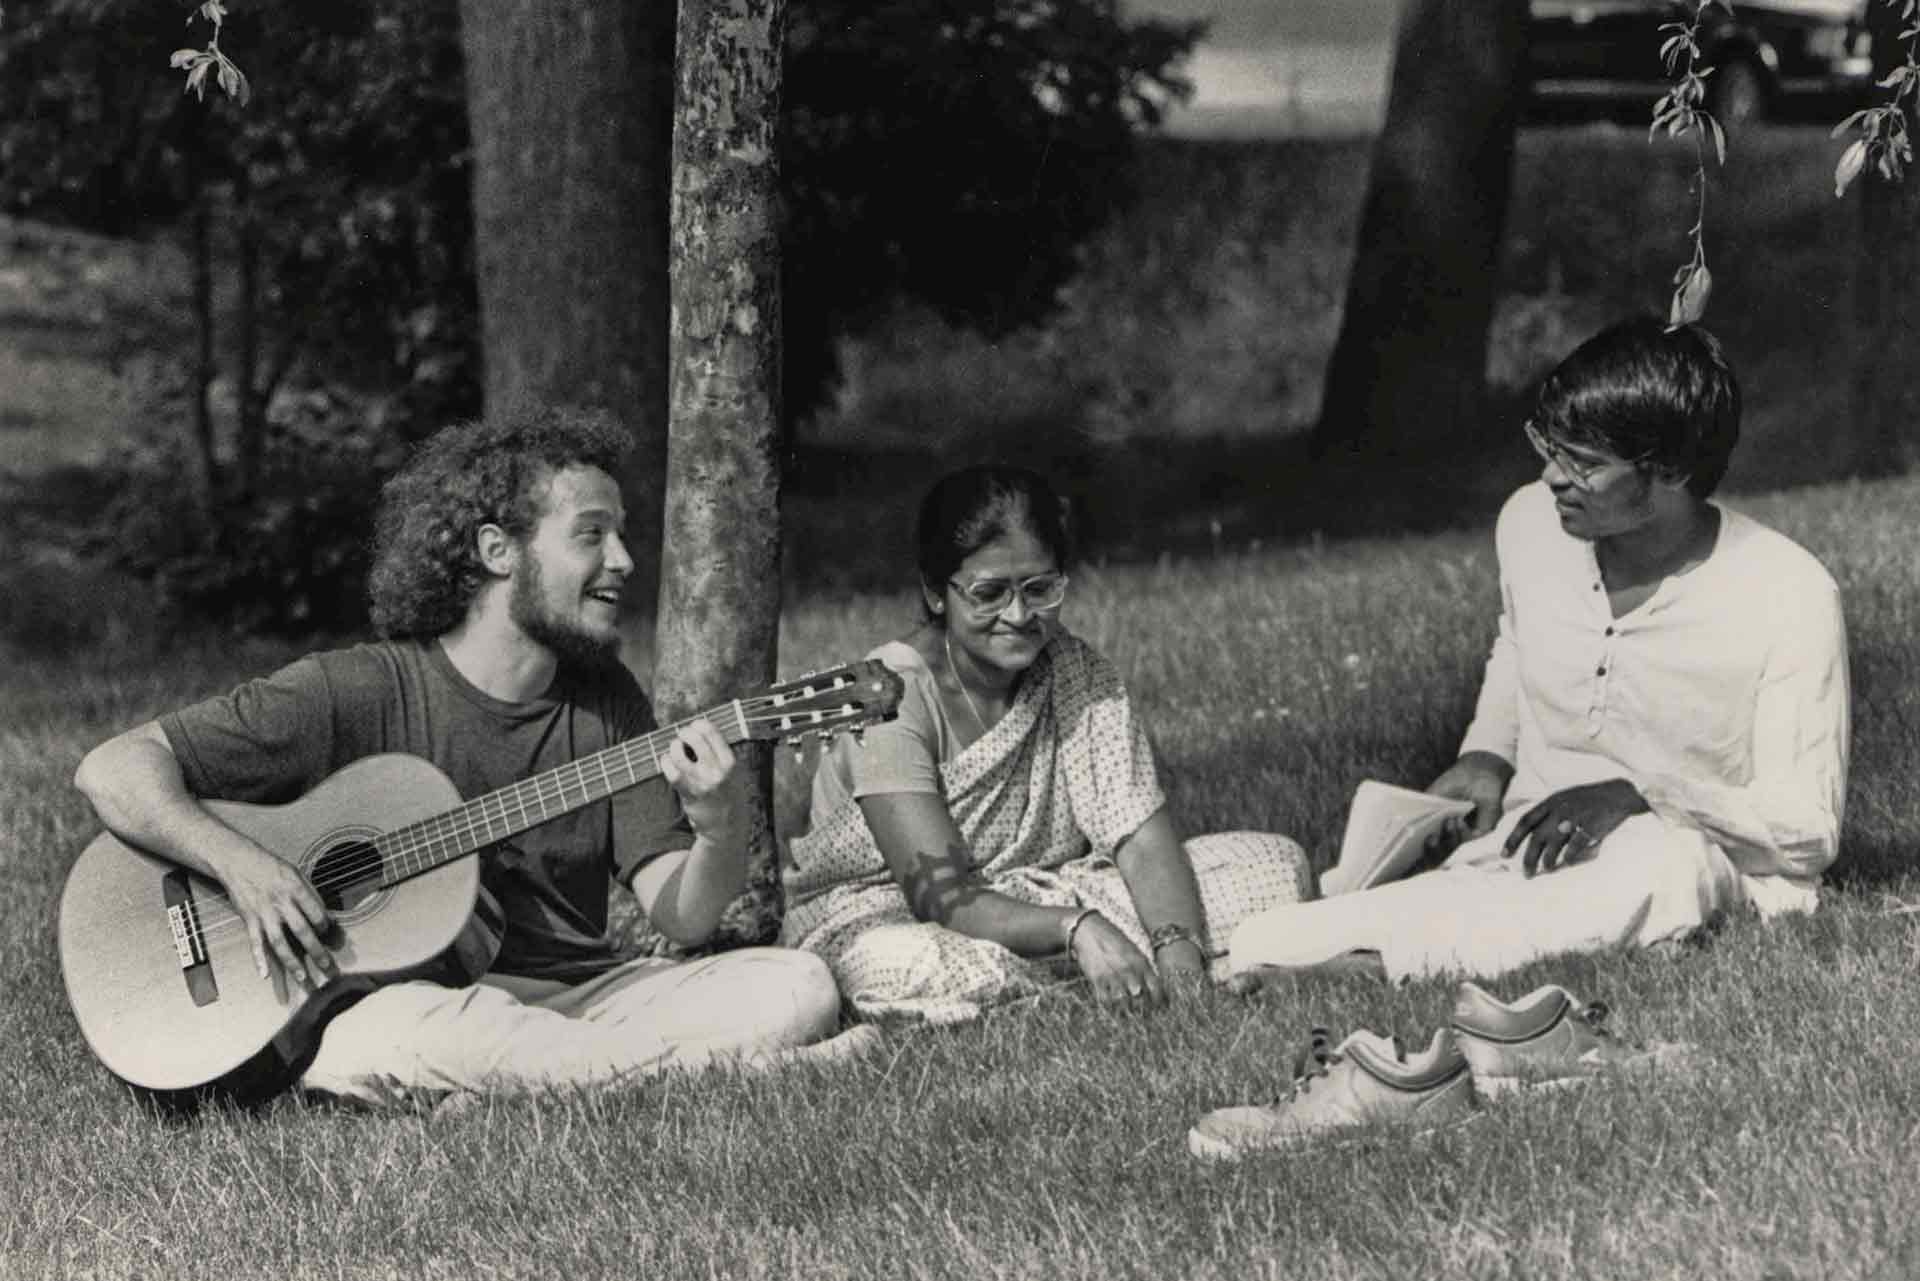 Black and white photo of people seated on the grass, one with a guitar